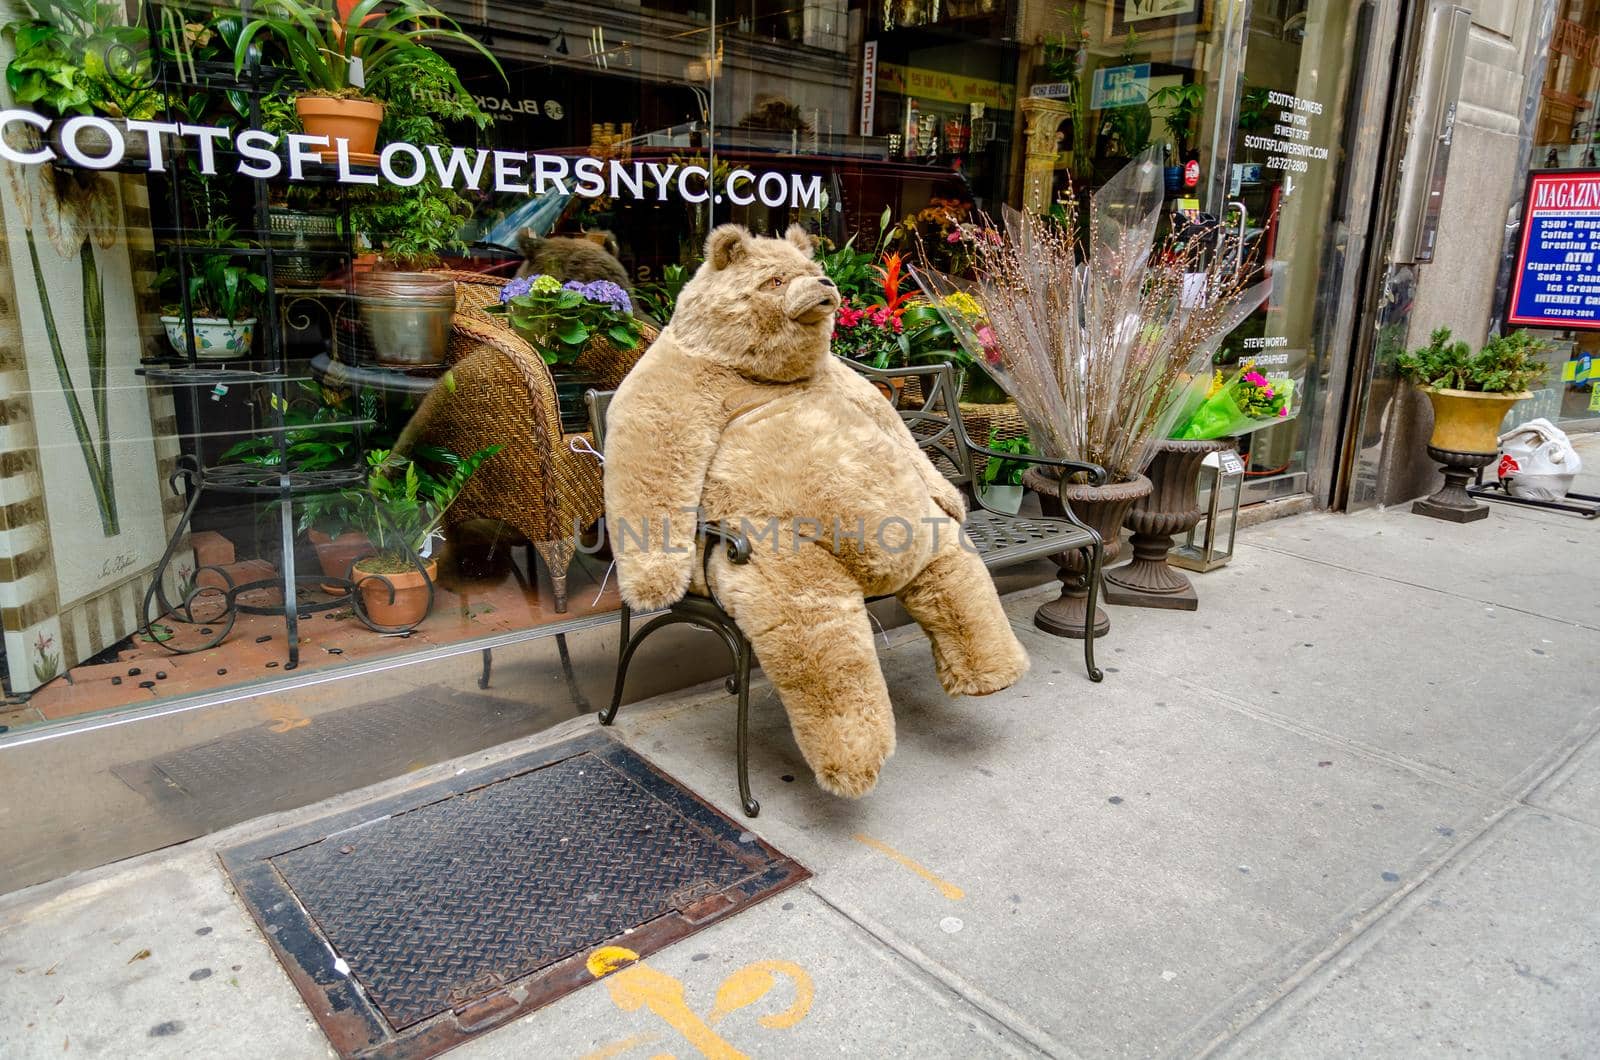 Huge Teddy Bear sitting on a bench in front of Scotts Flowers New York City by bildgigant